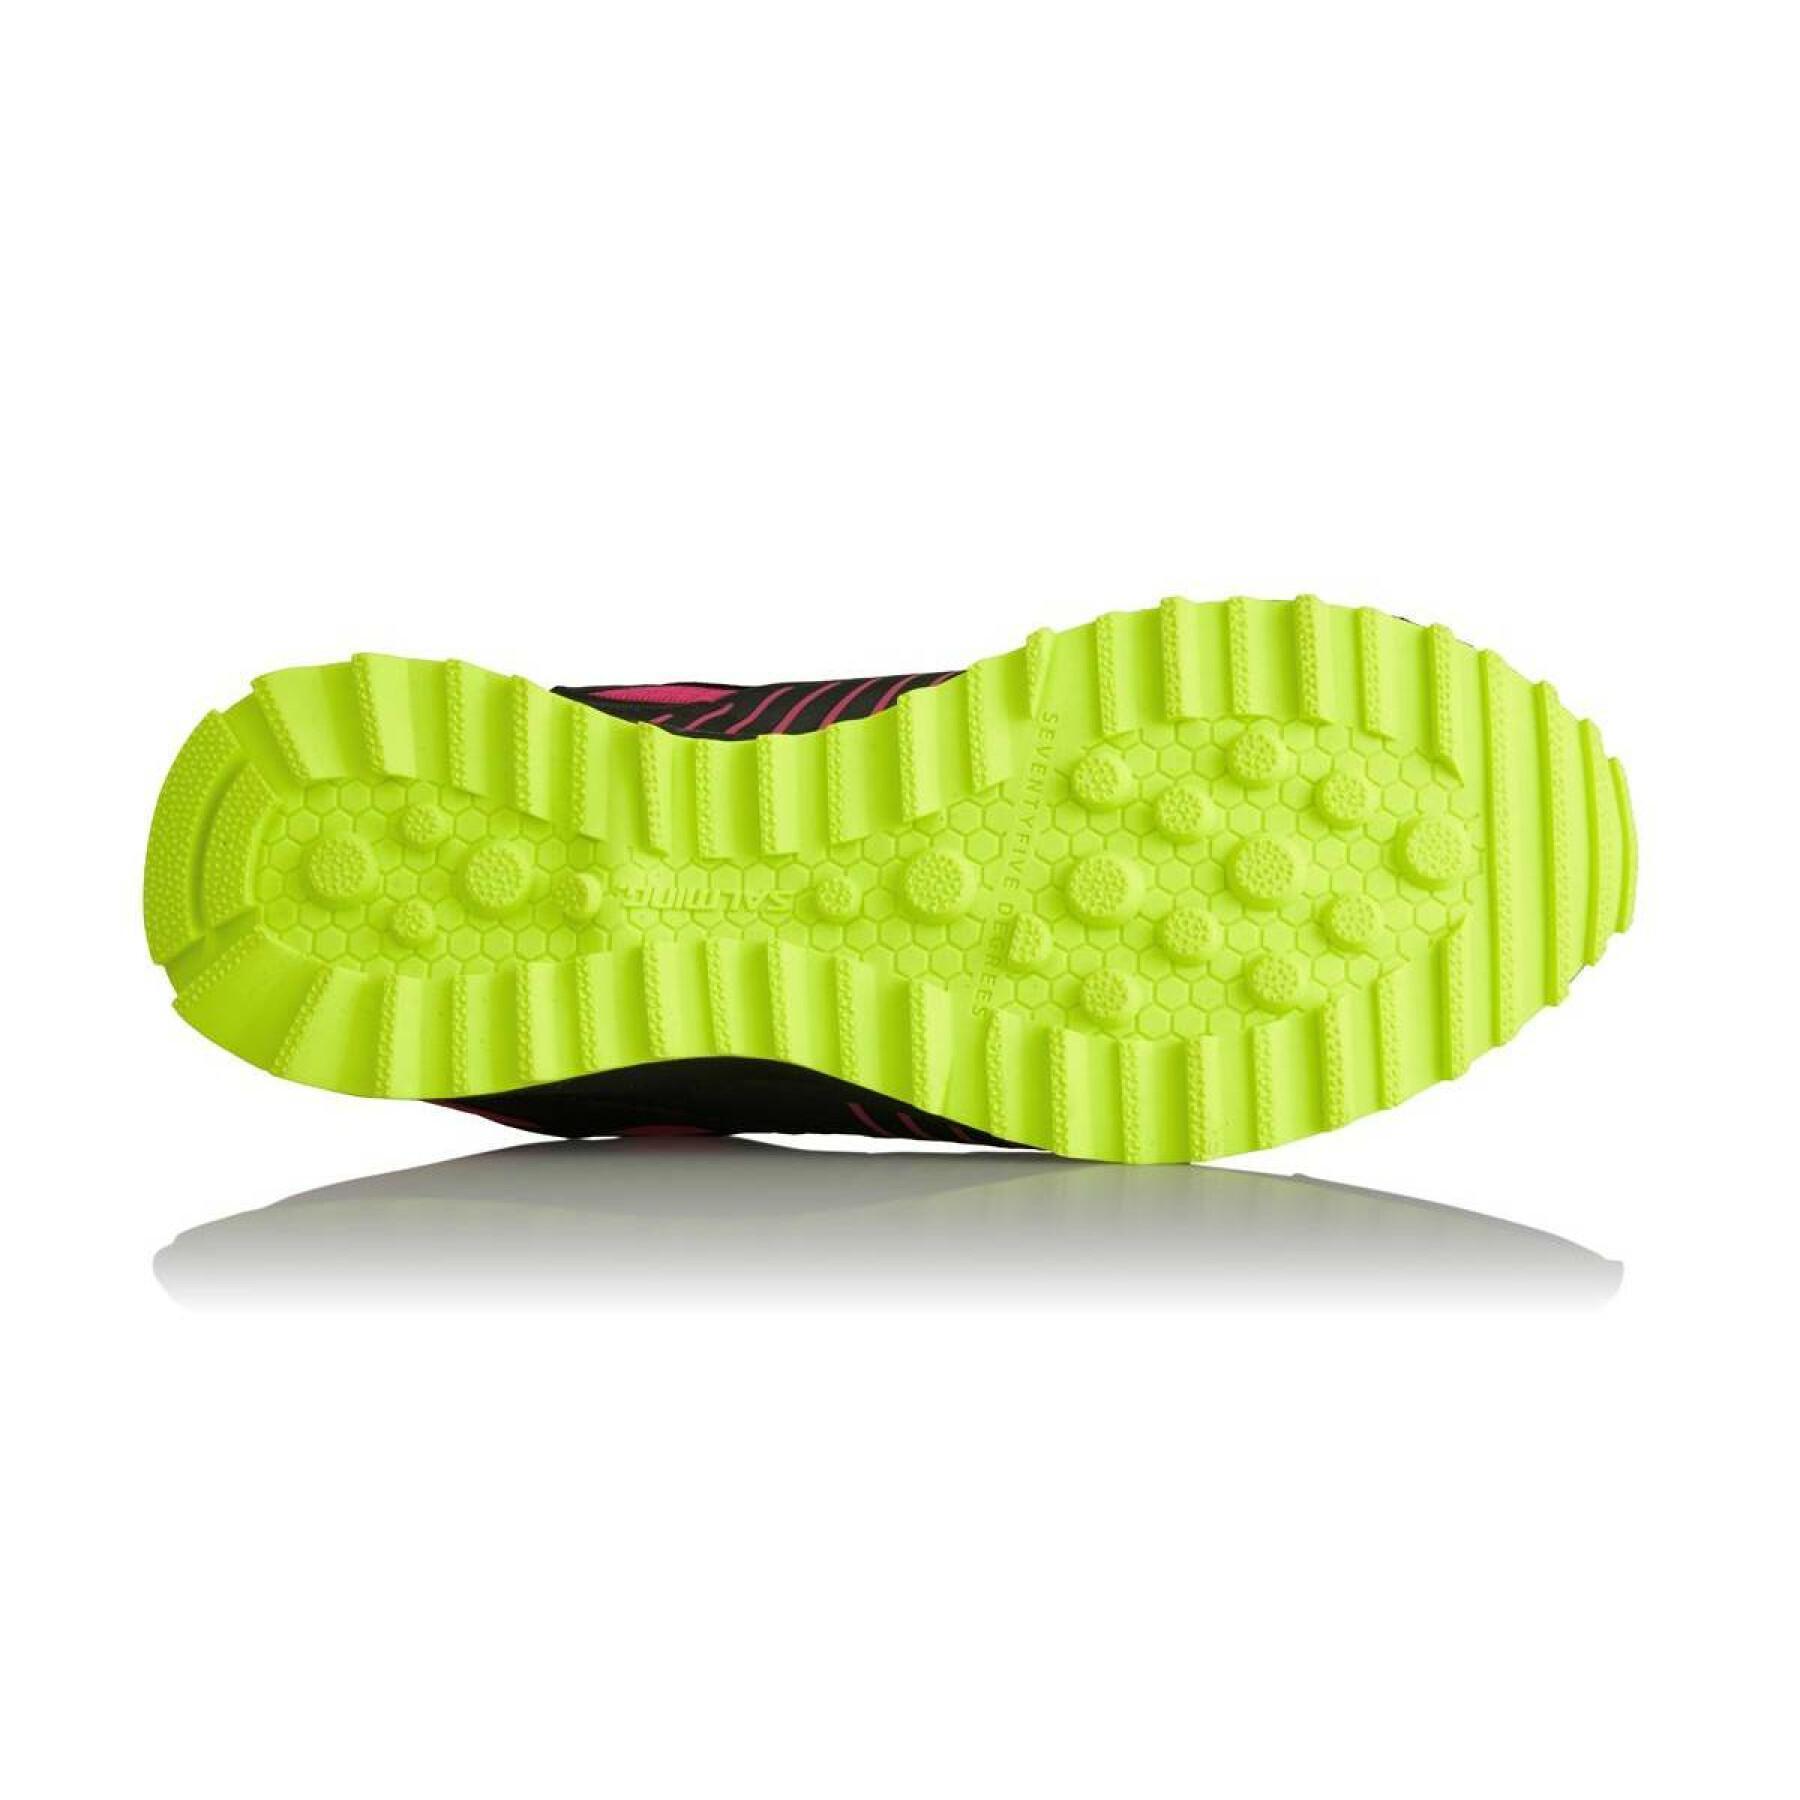 Zapatos de mujer Salming trail T4